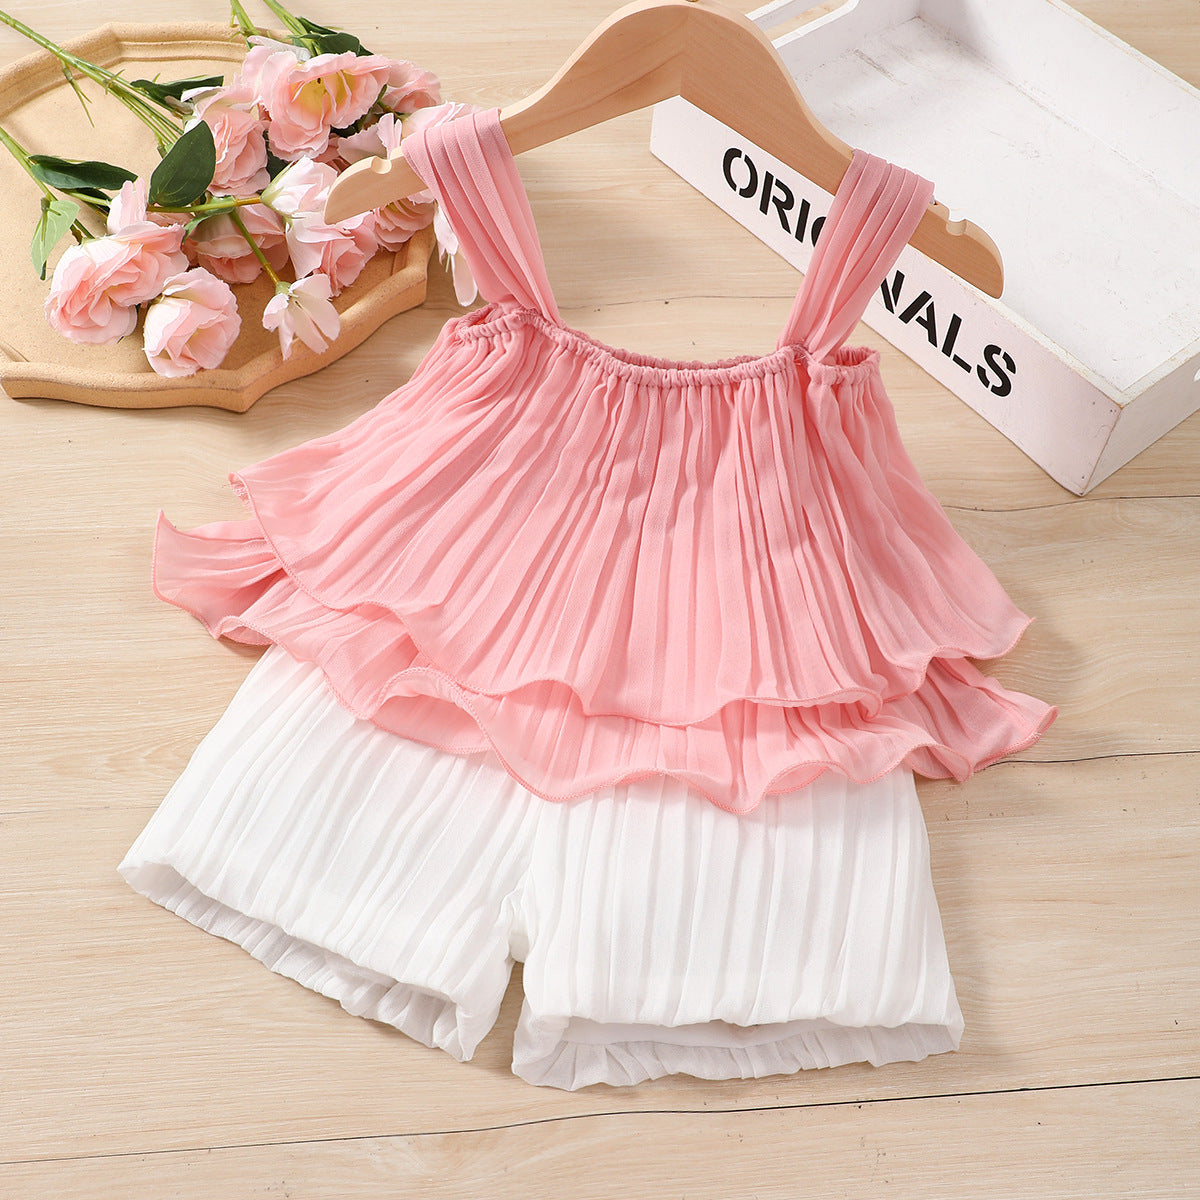 Girl's Beautiful Style Chiffon Suspenders Solid Skirt Top Shorts Seaside Suit